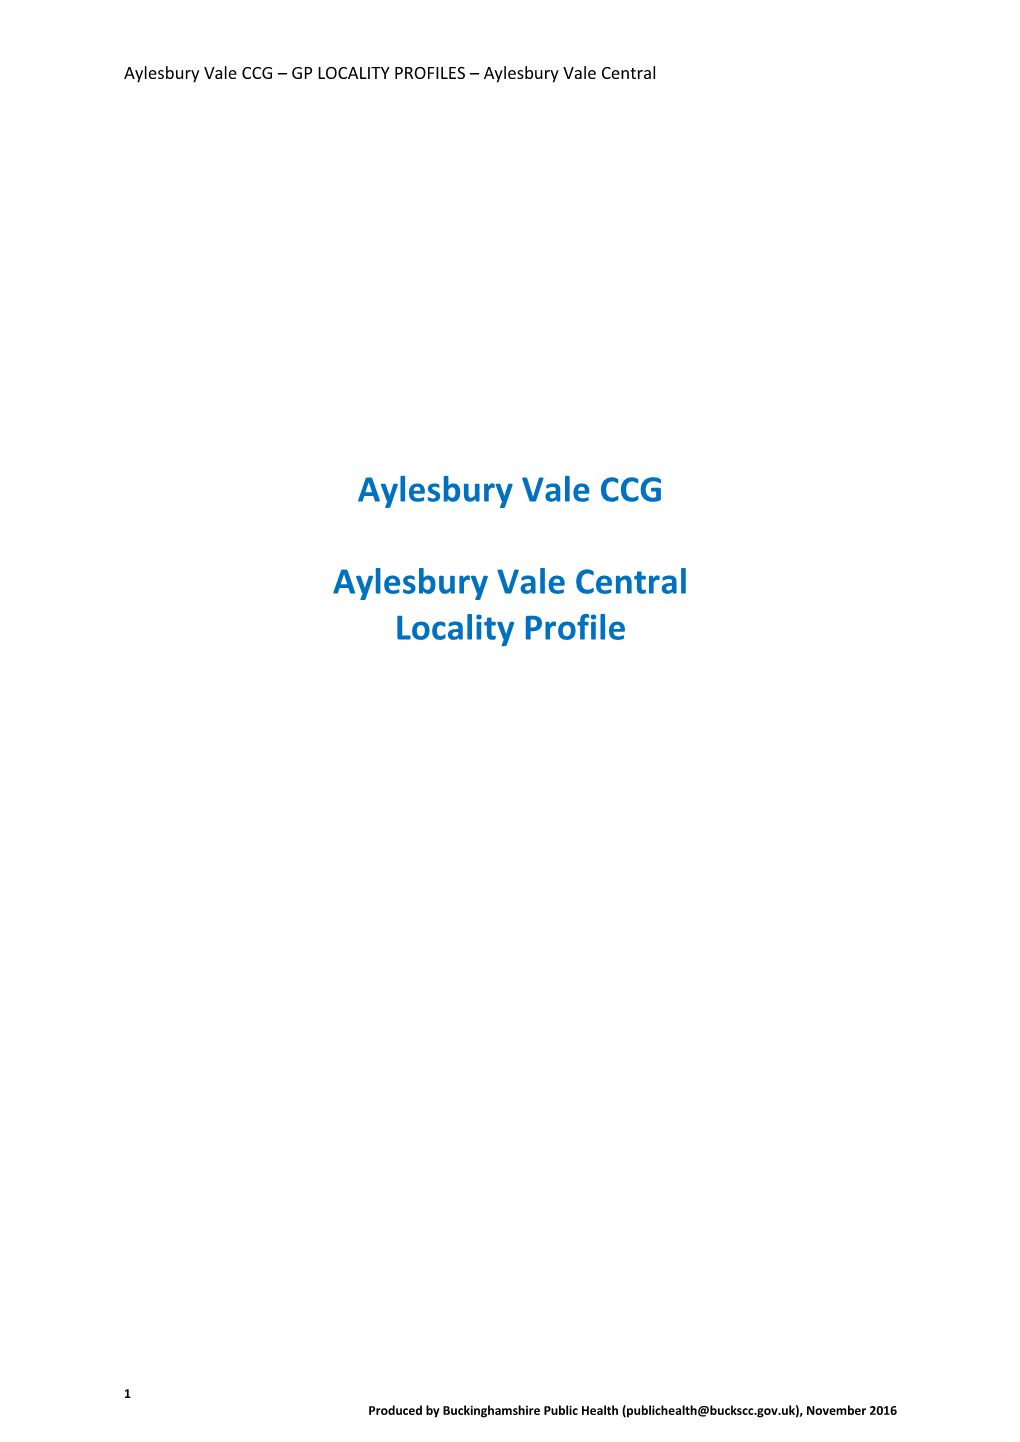 Aylesbury Vale CCG Aylesbury Vale Central Locality Profile